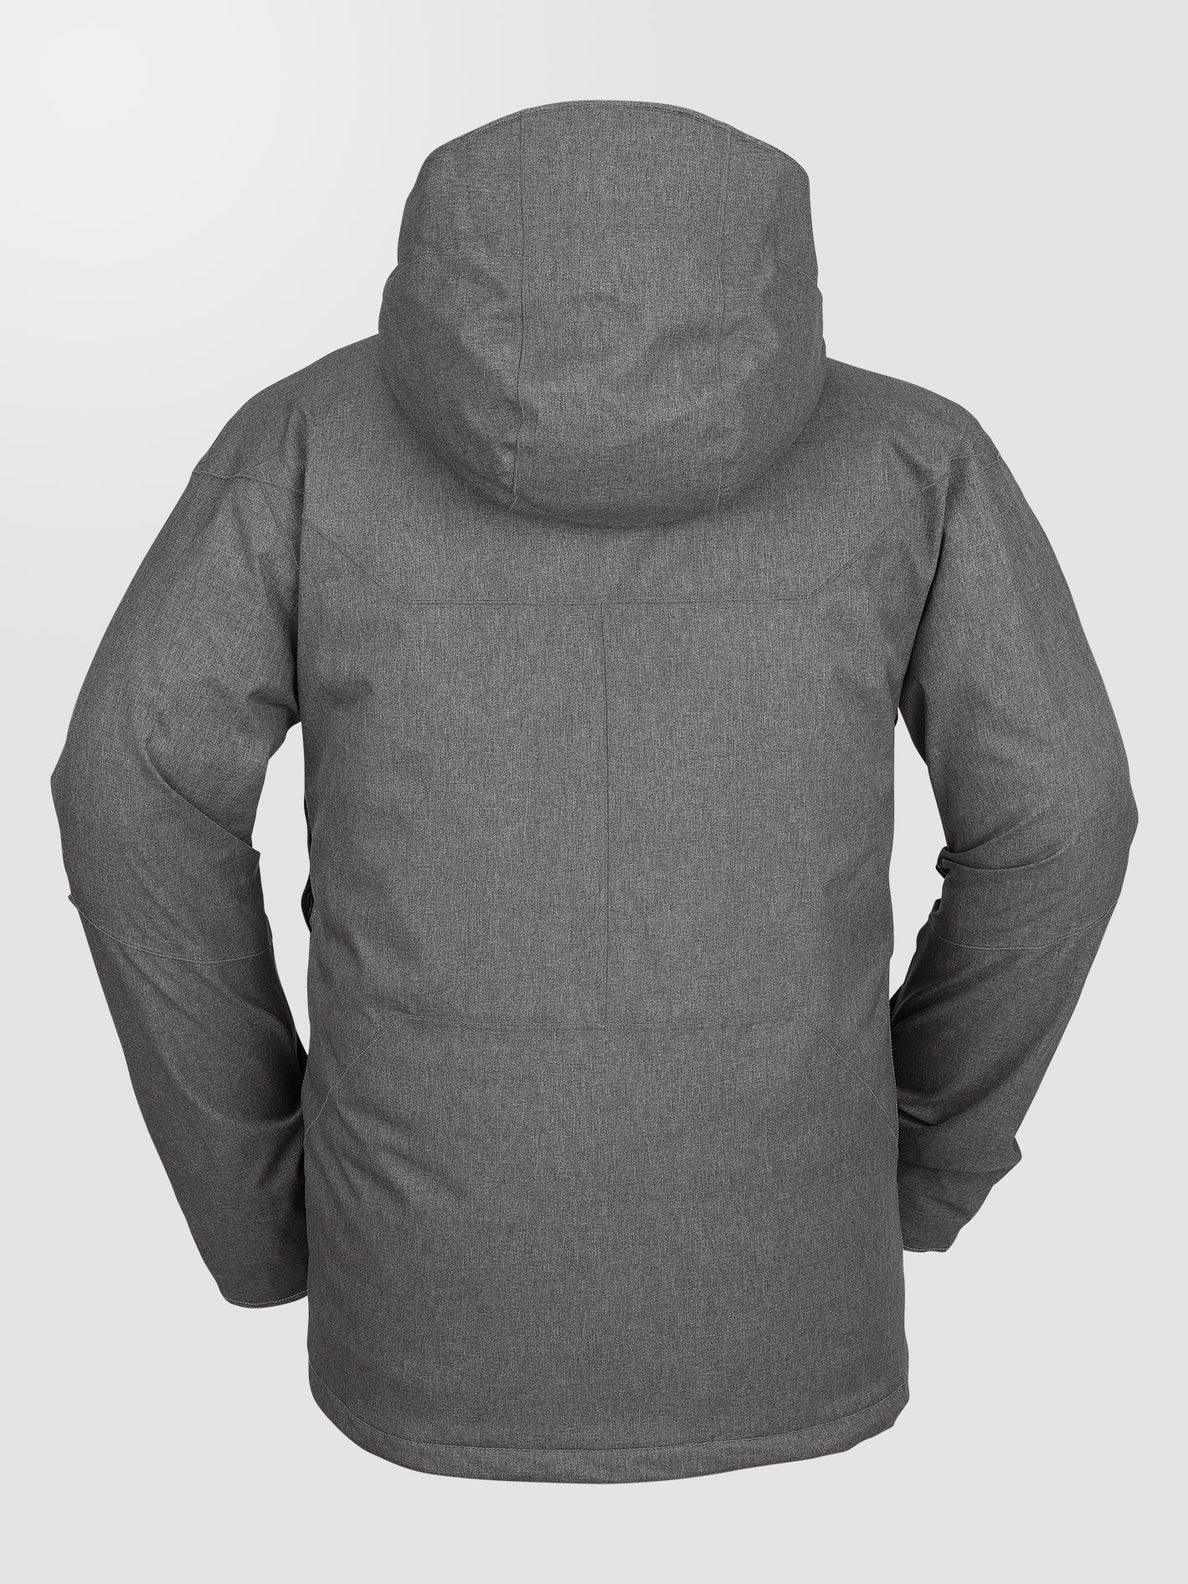 Anders 2L Tds Inf Jacket - SKY GREY